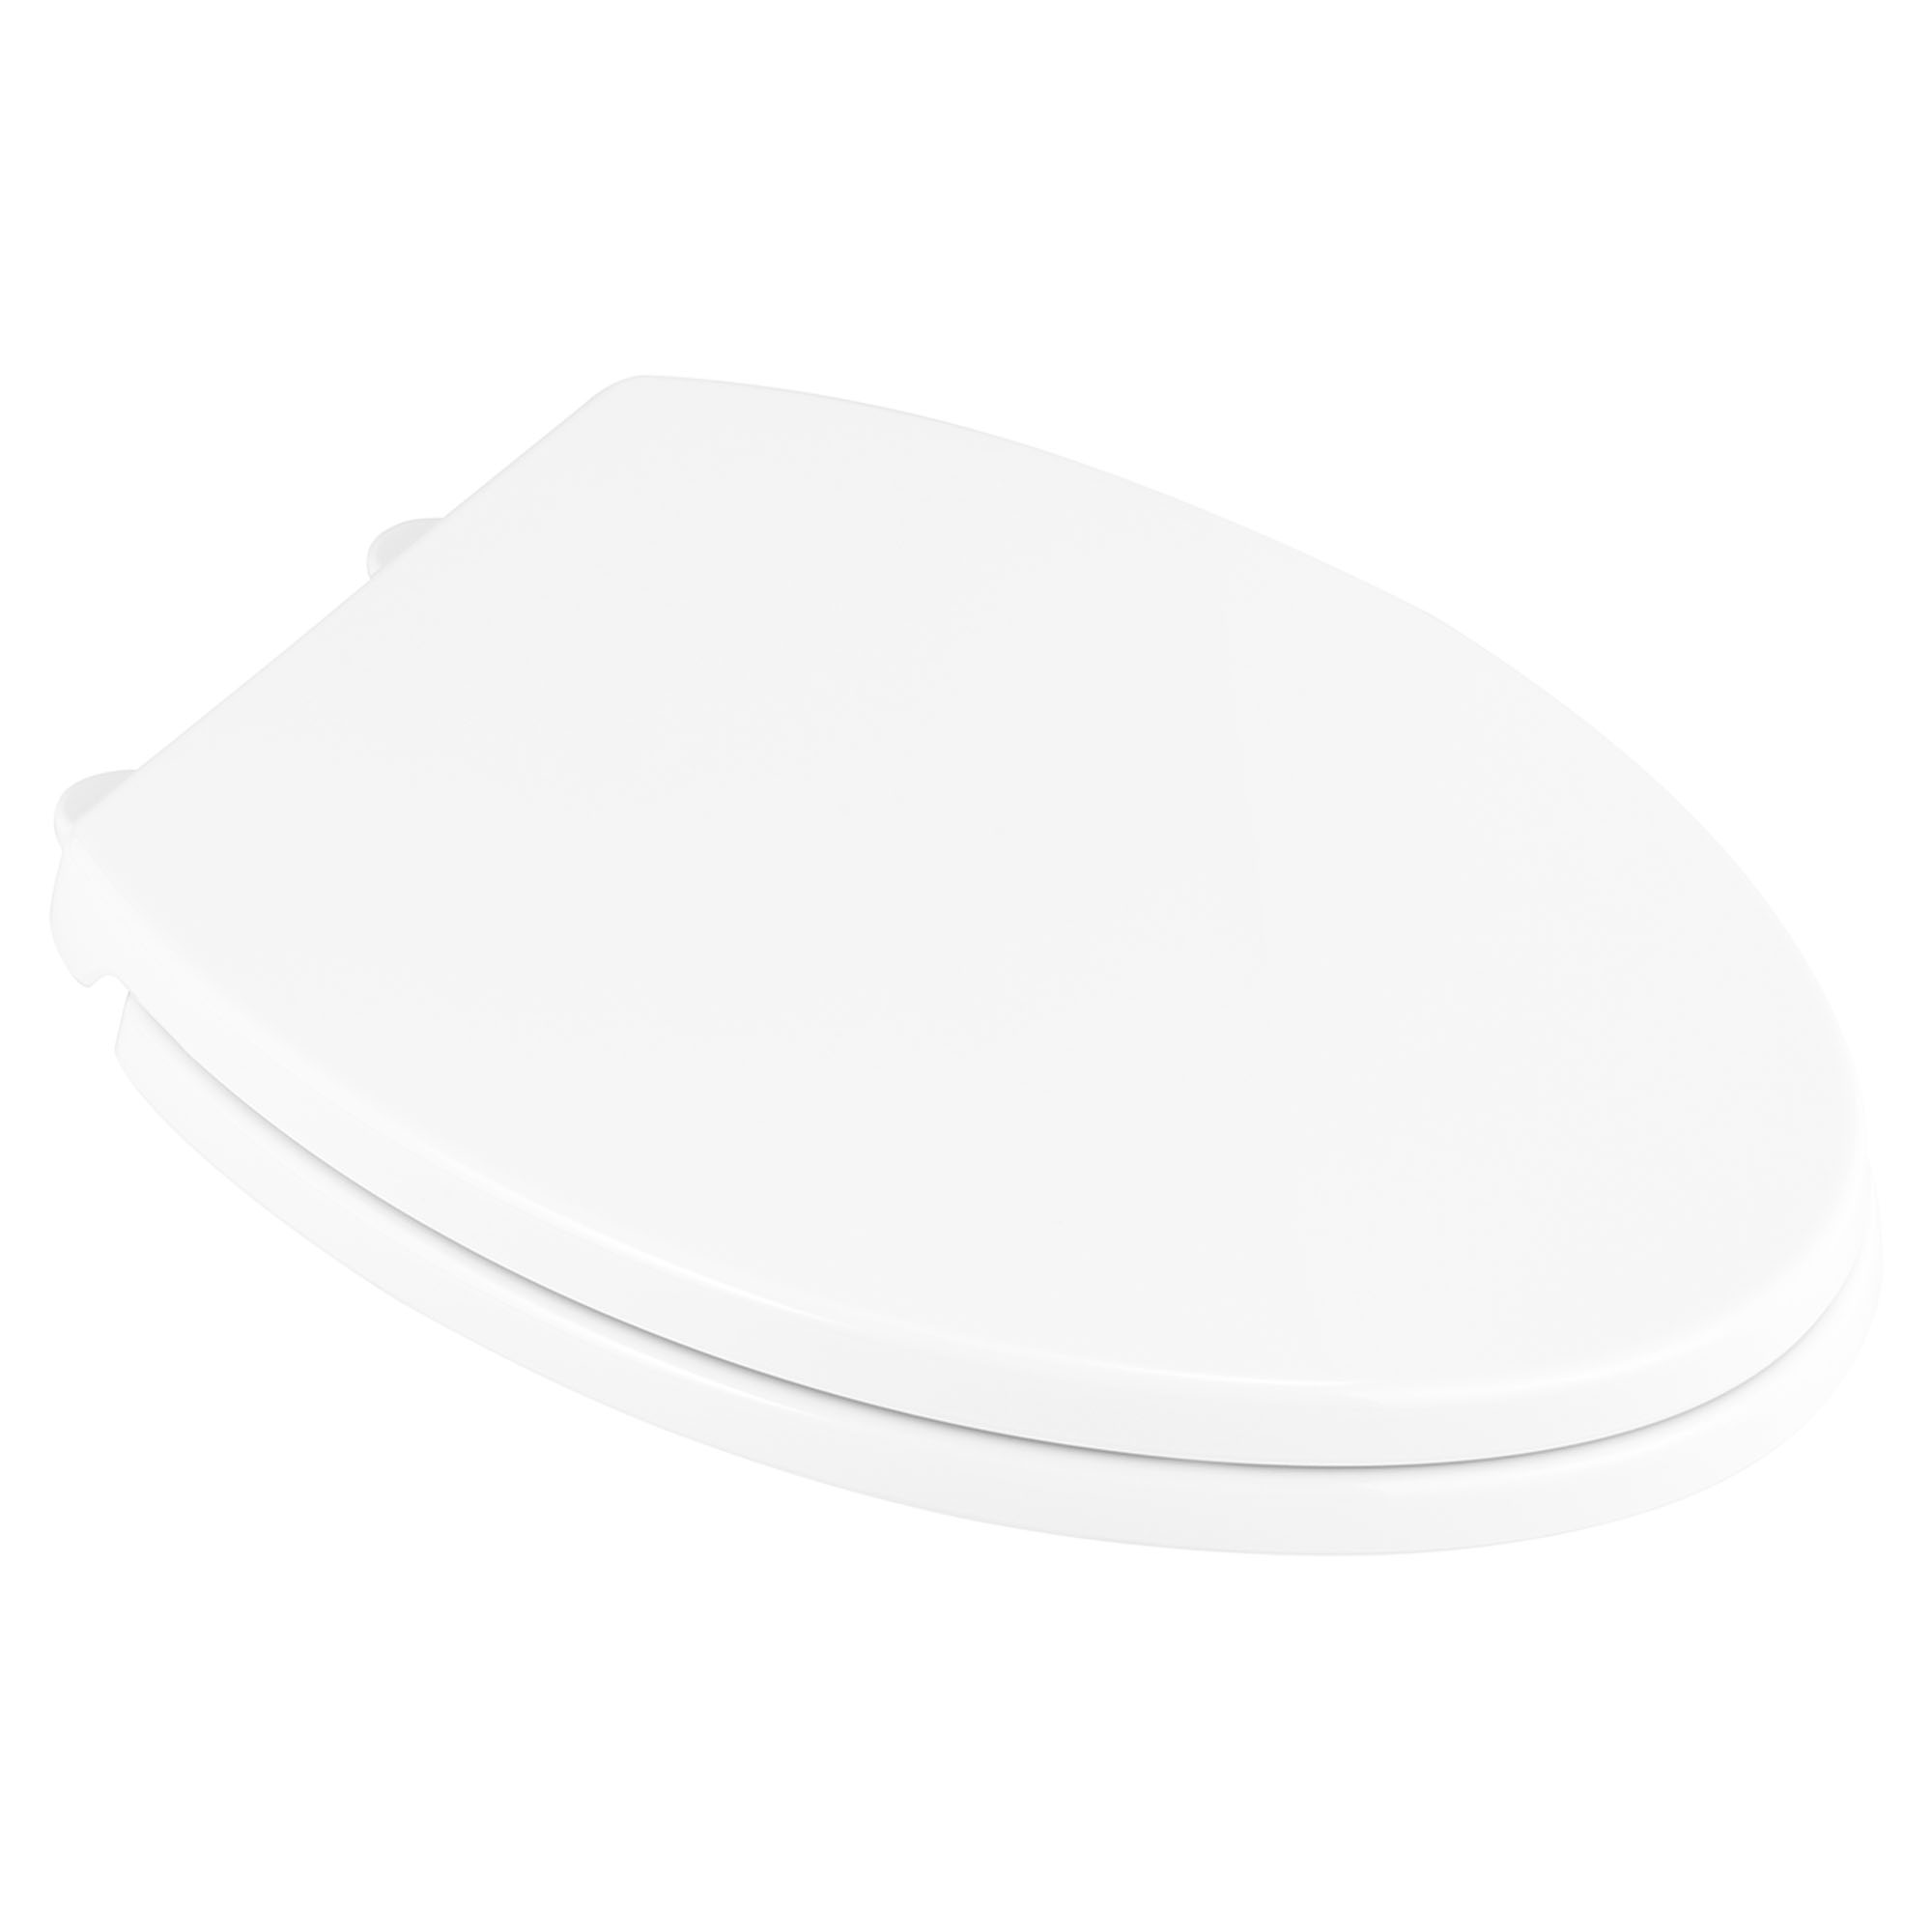 Transitional Elongated Closed Front Toilet Seat